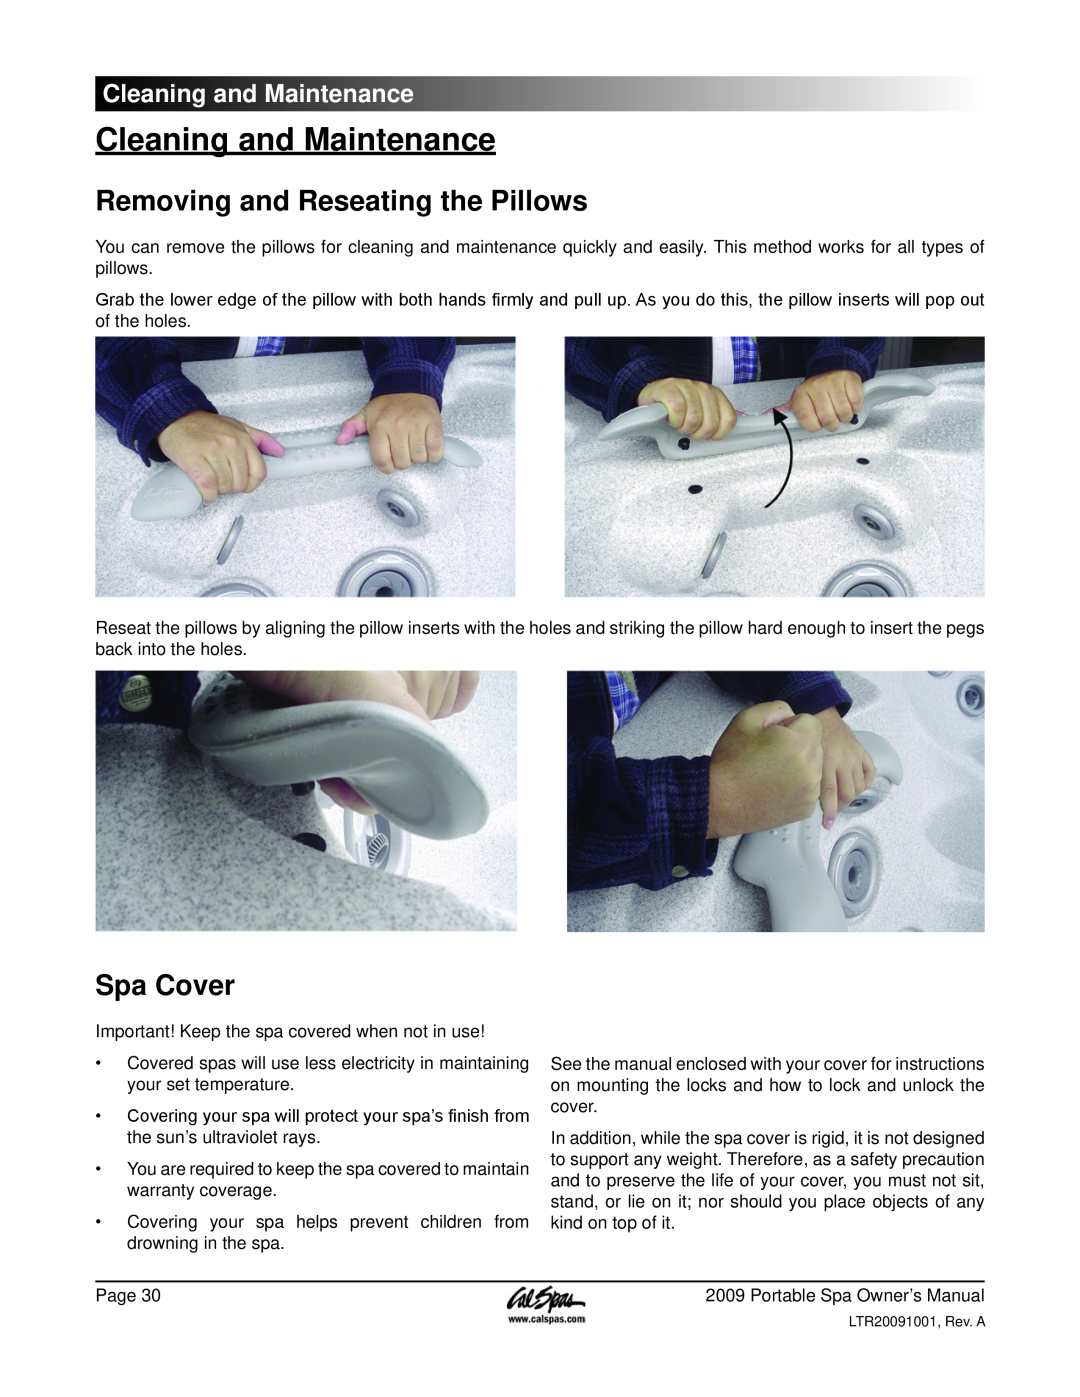 Cal Spas Portable Spas manual Cleaning and Maintenance, Removing and Reseating the Pillows, Spa Cover 